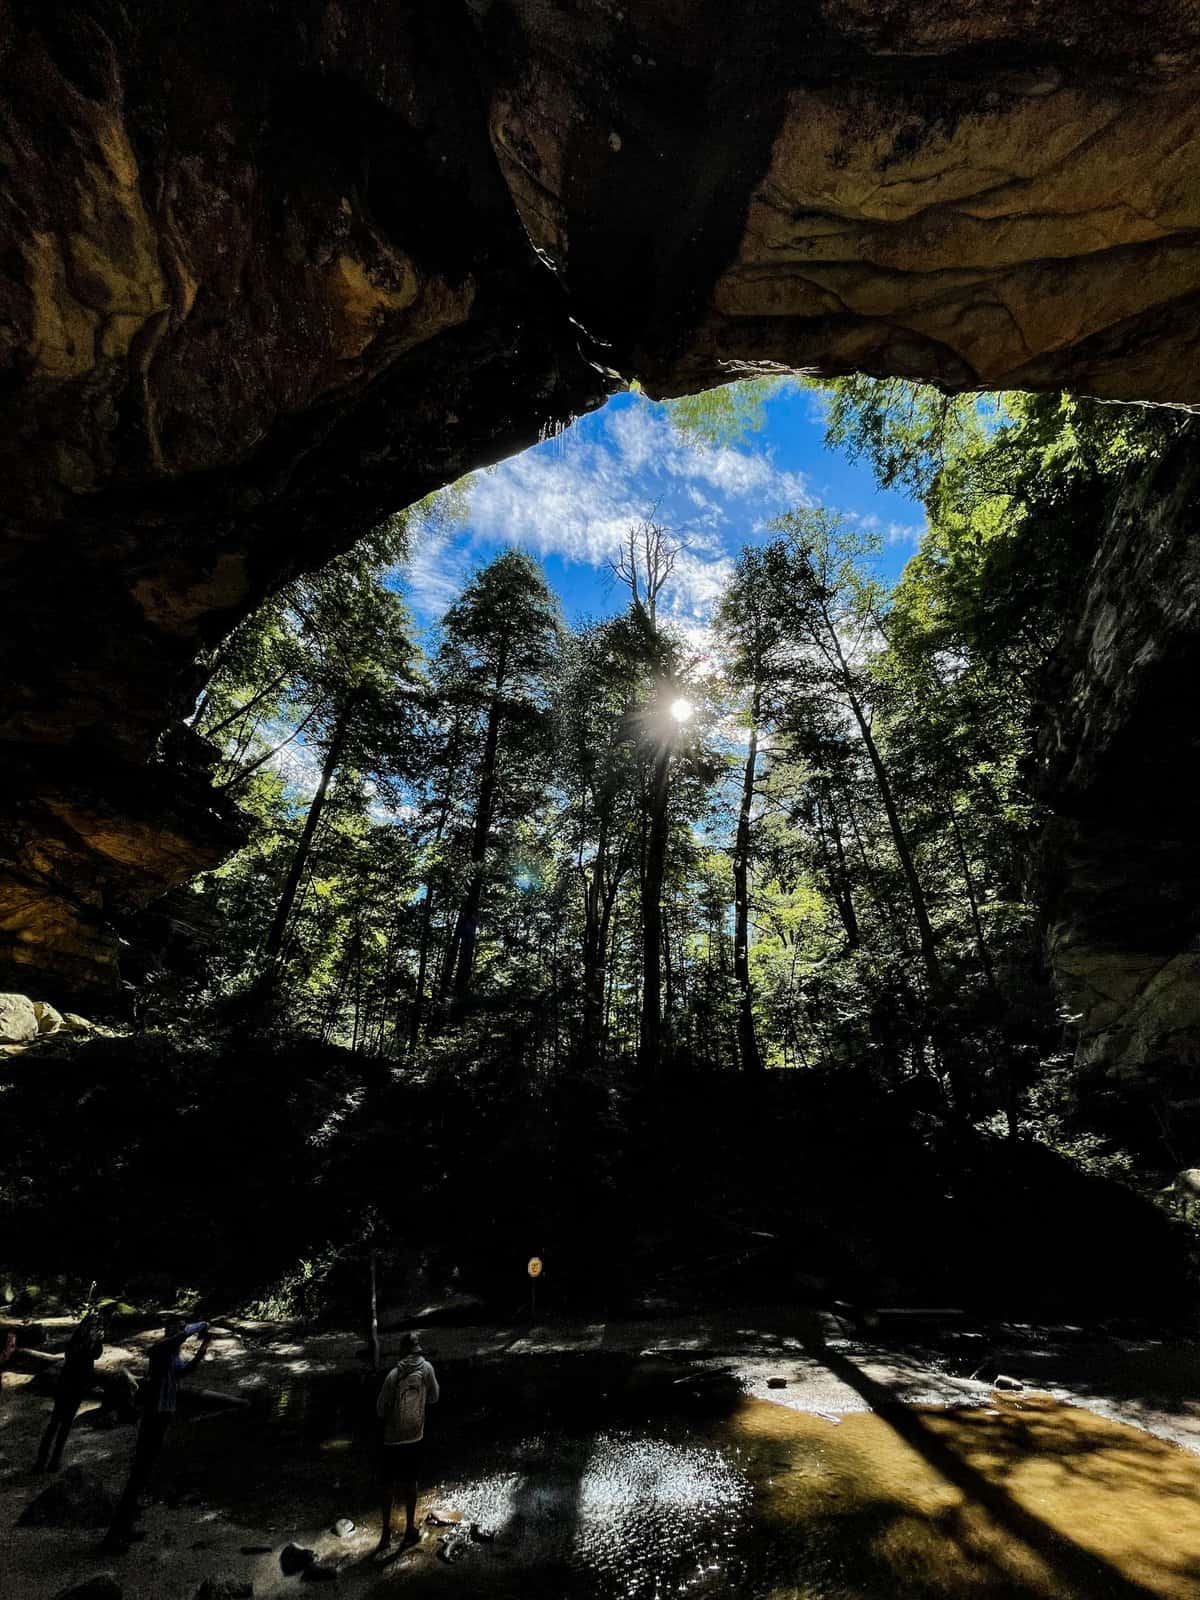 Ash Cave at Hocking Hills State Park in Ohio